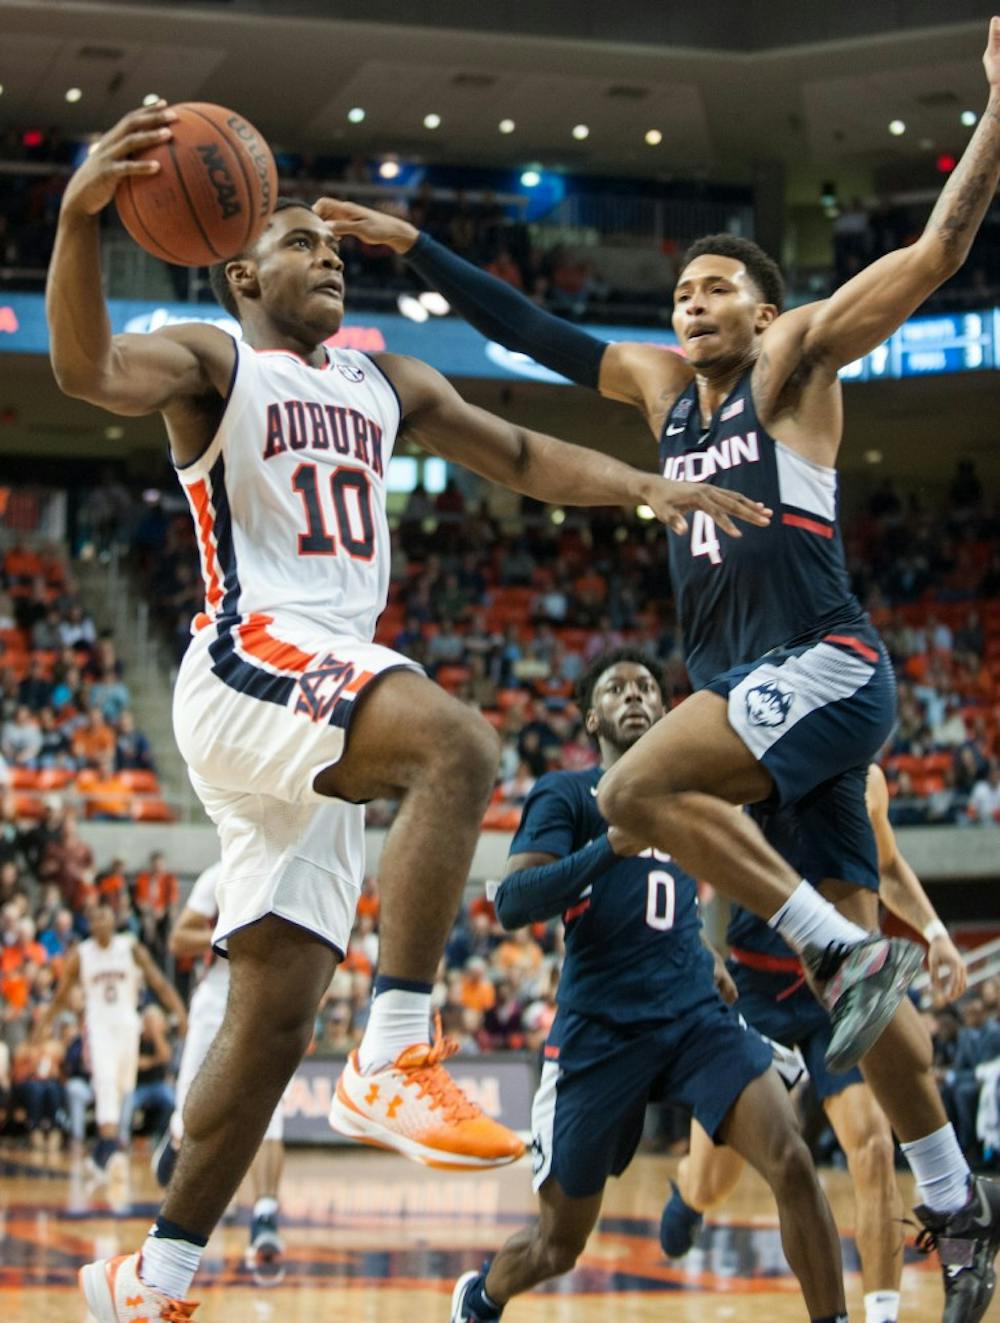 <p>Davion Mitchell (10) looks to take the ball to the basket in the second half. Auburn vs UConn on Saturday, Dec. 23 in Auburn, Ala.</p>